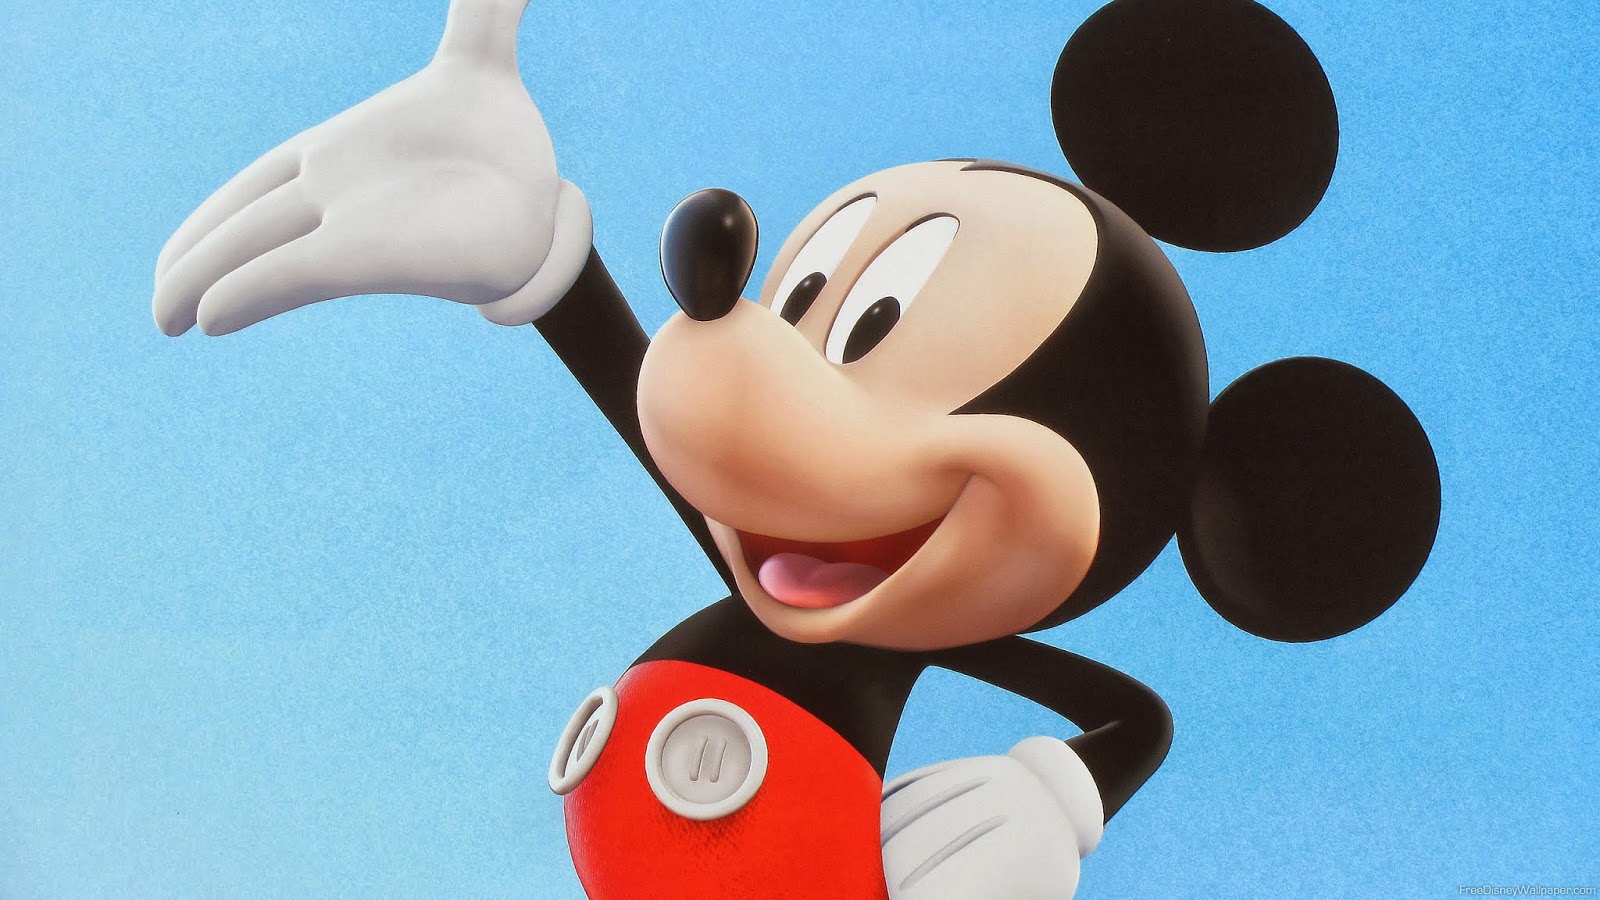 Disney HD Wallpapers: Mickey Mouse HD Wallpapers